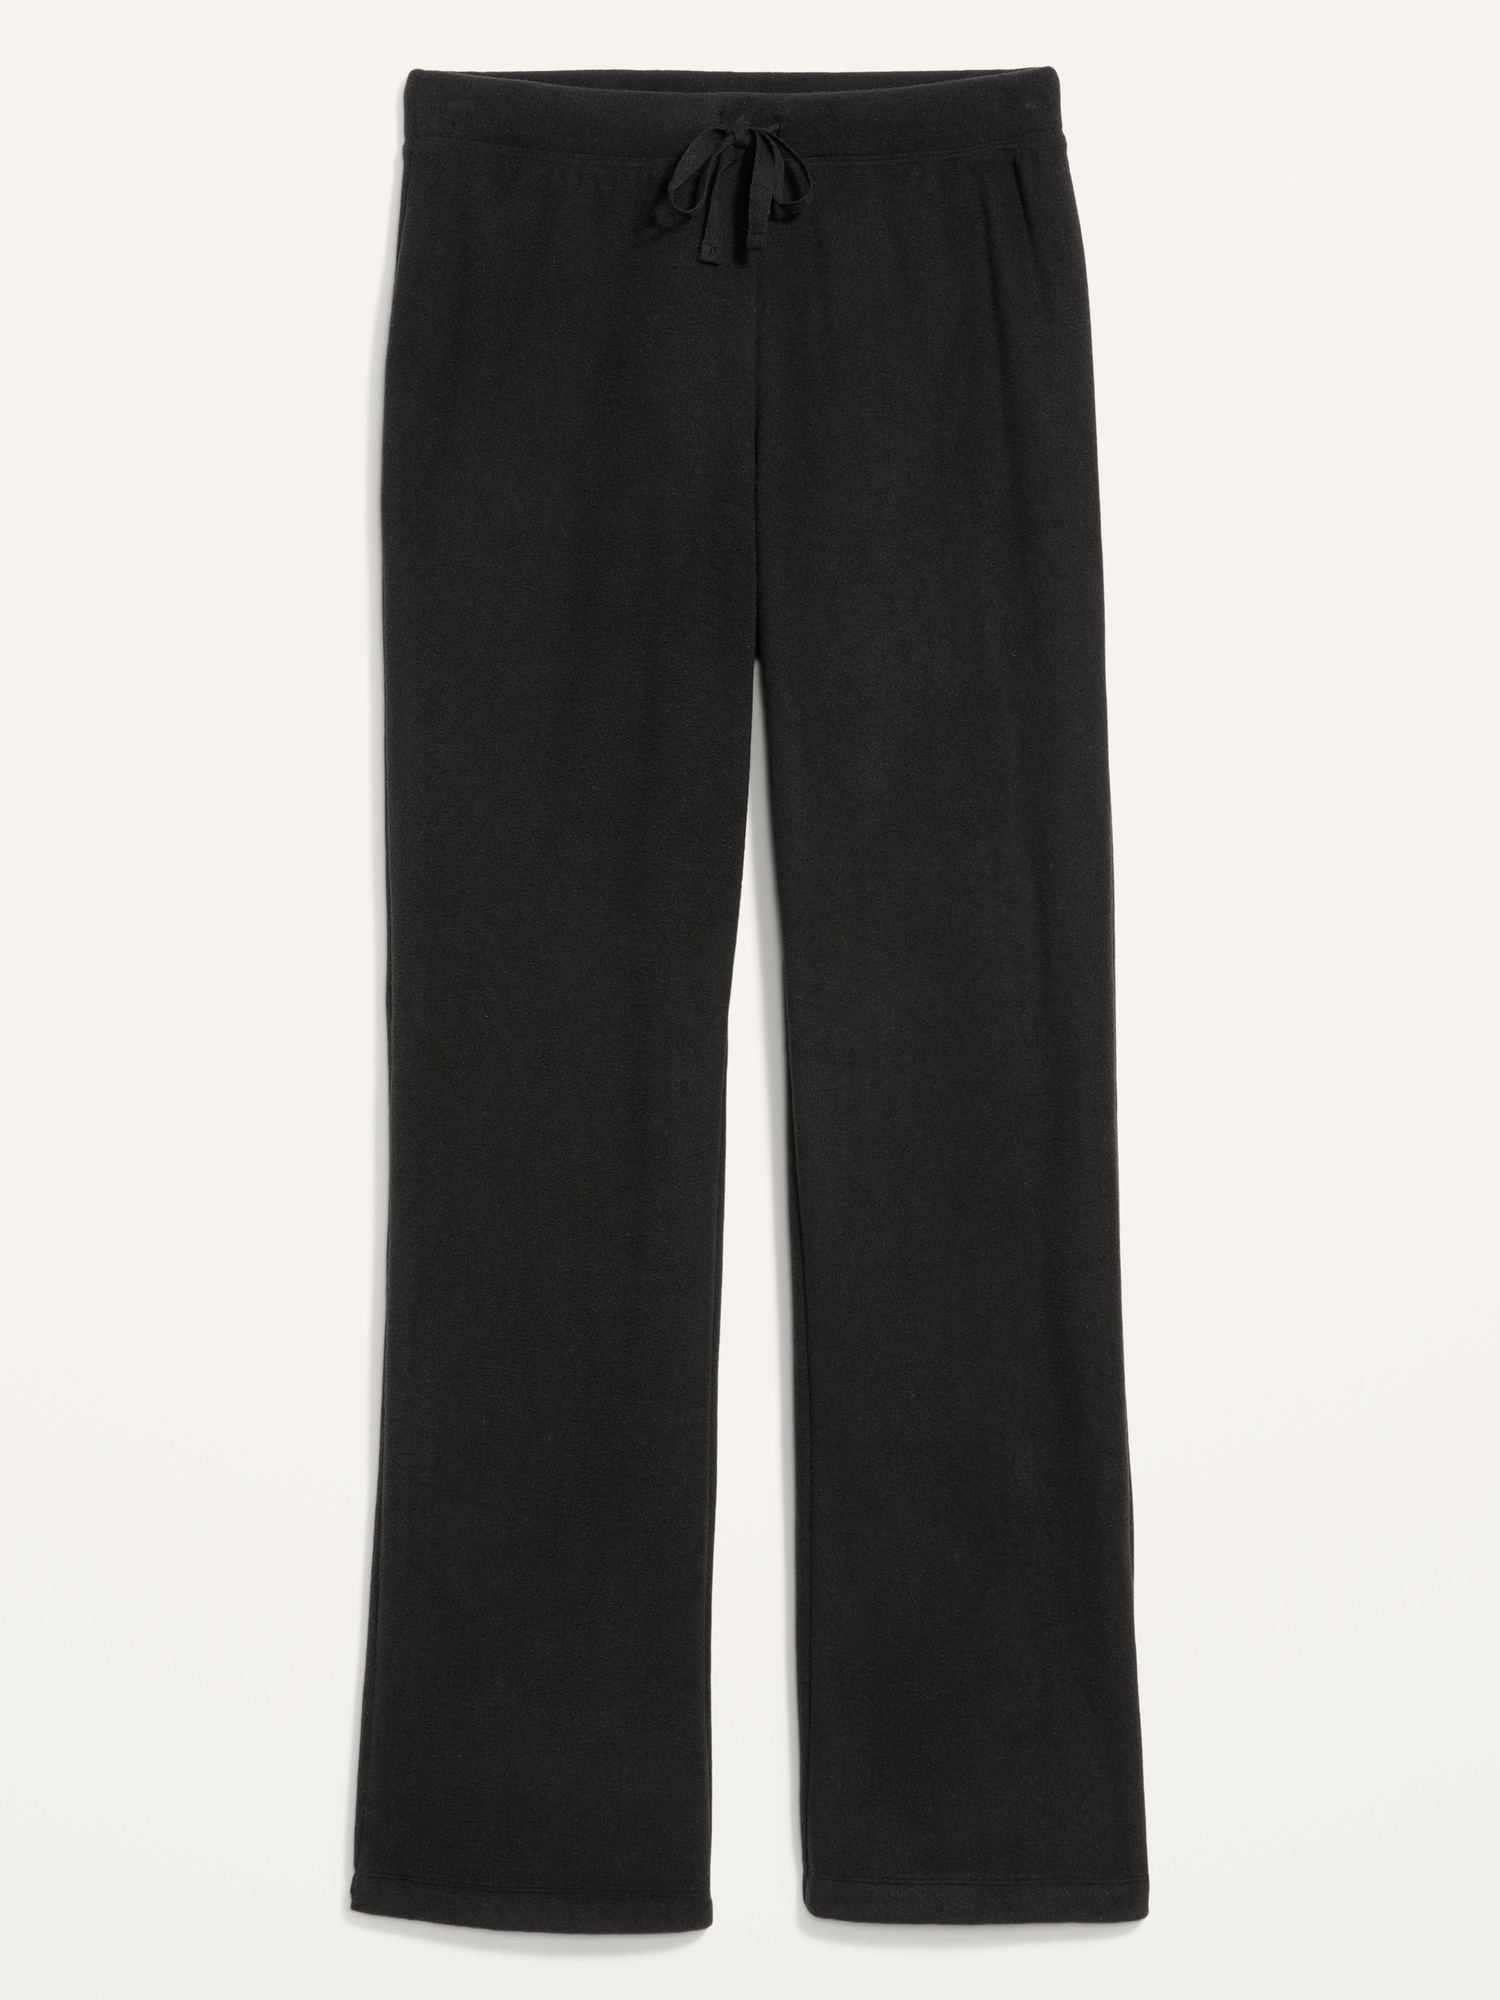 Mid-Rise Microfleece Pajama Pants for Women | Old Navy